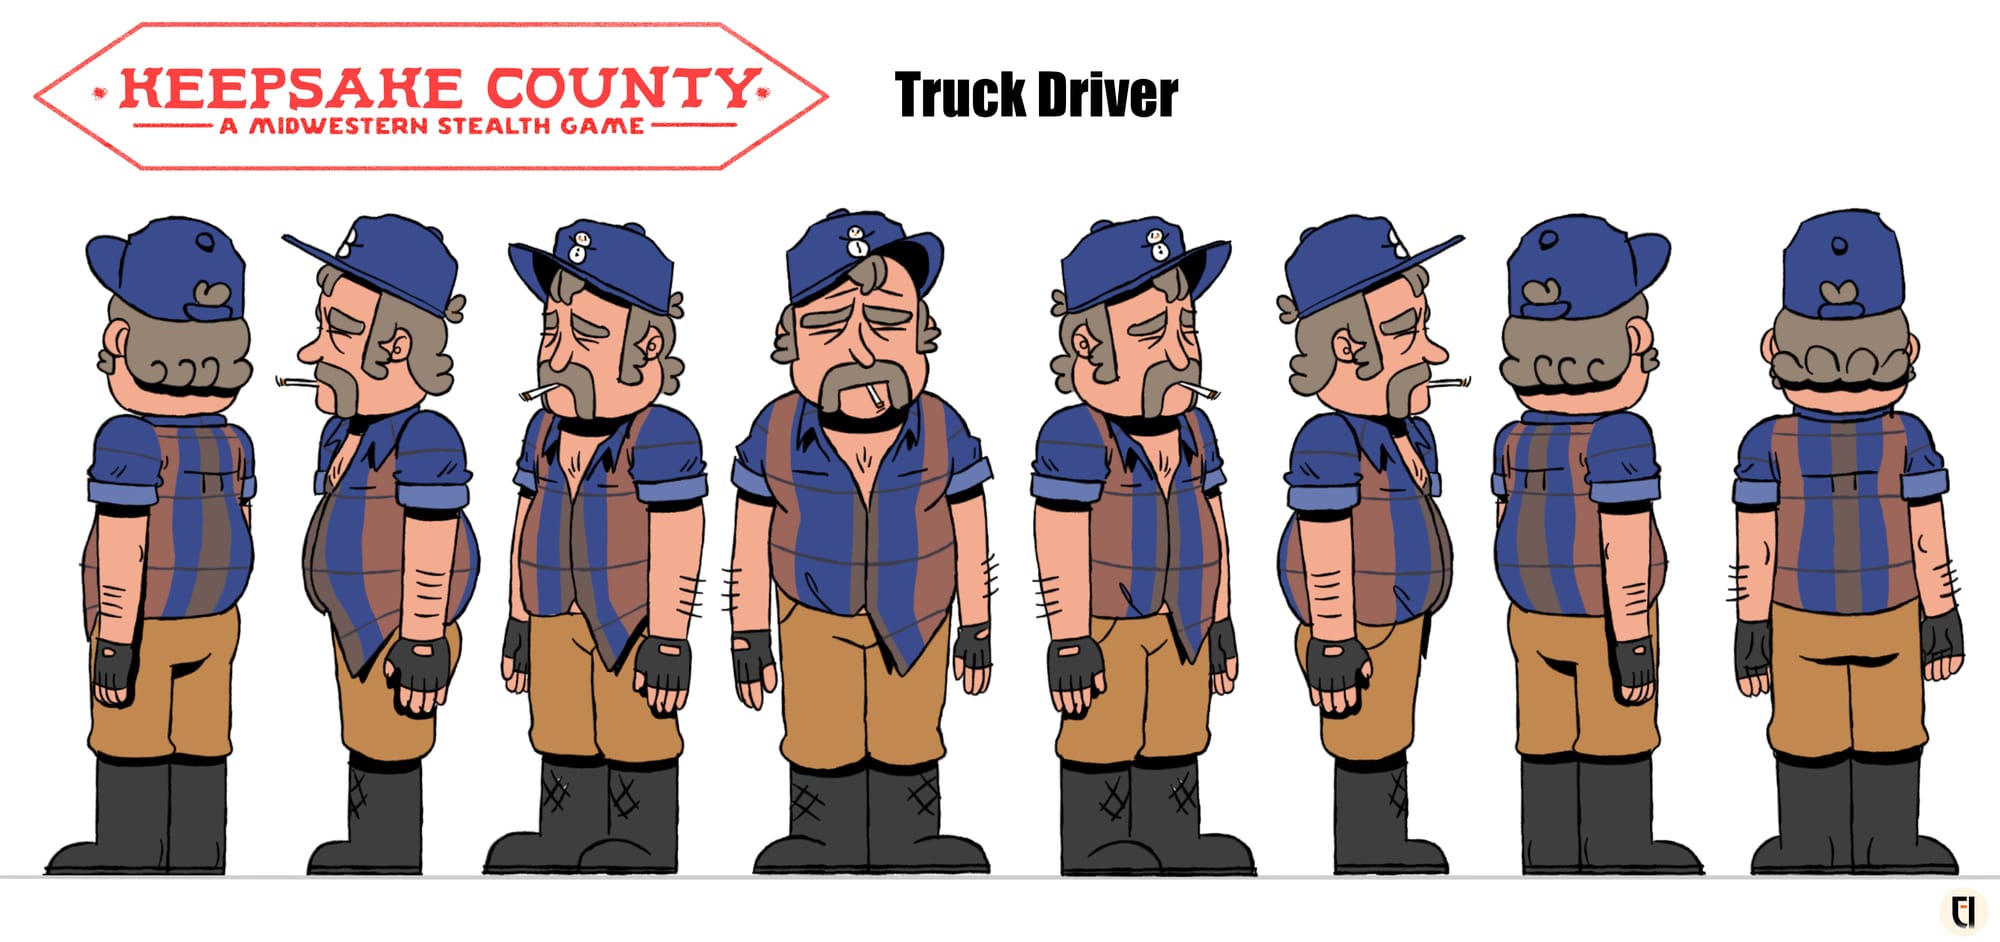 360-degree drawings of the character art for a Truck Driver. He is an older, pudgy man in a striped shirt.